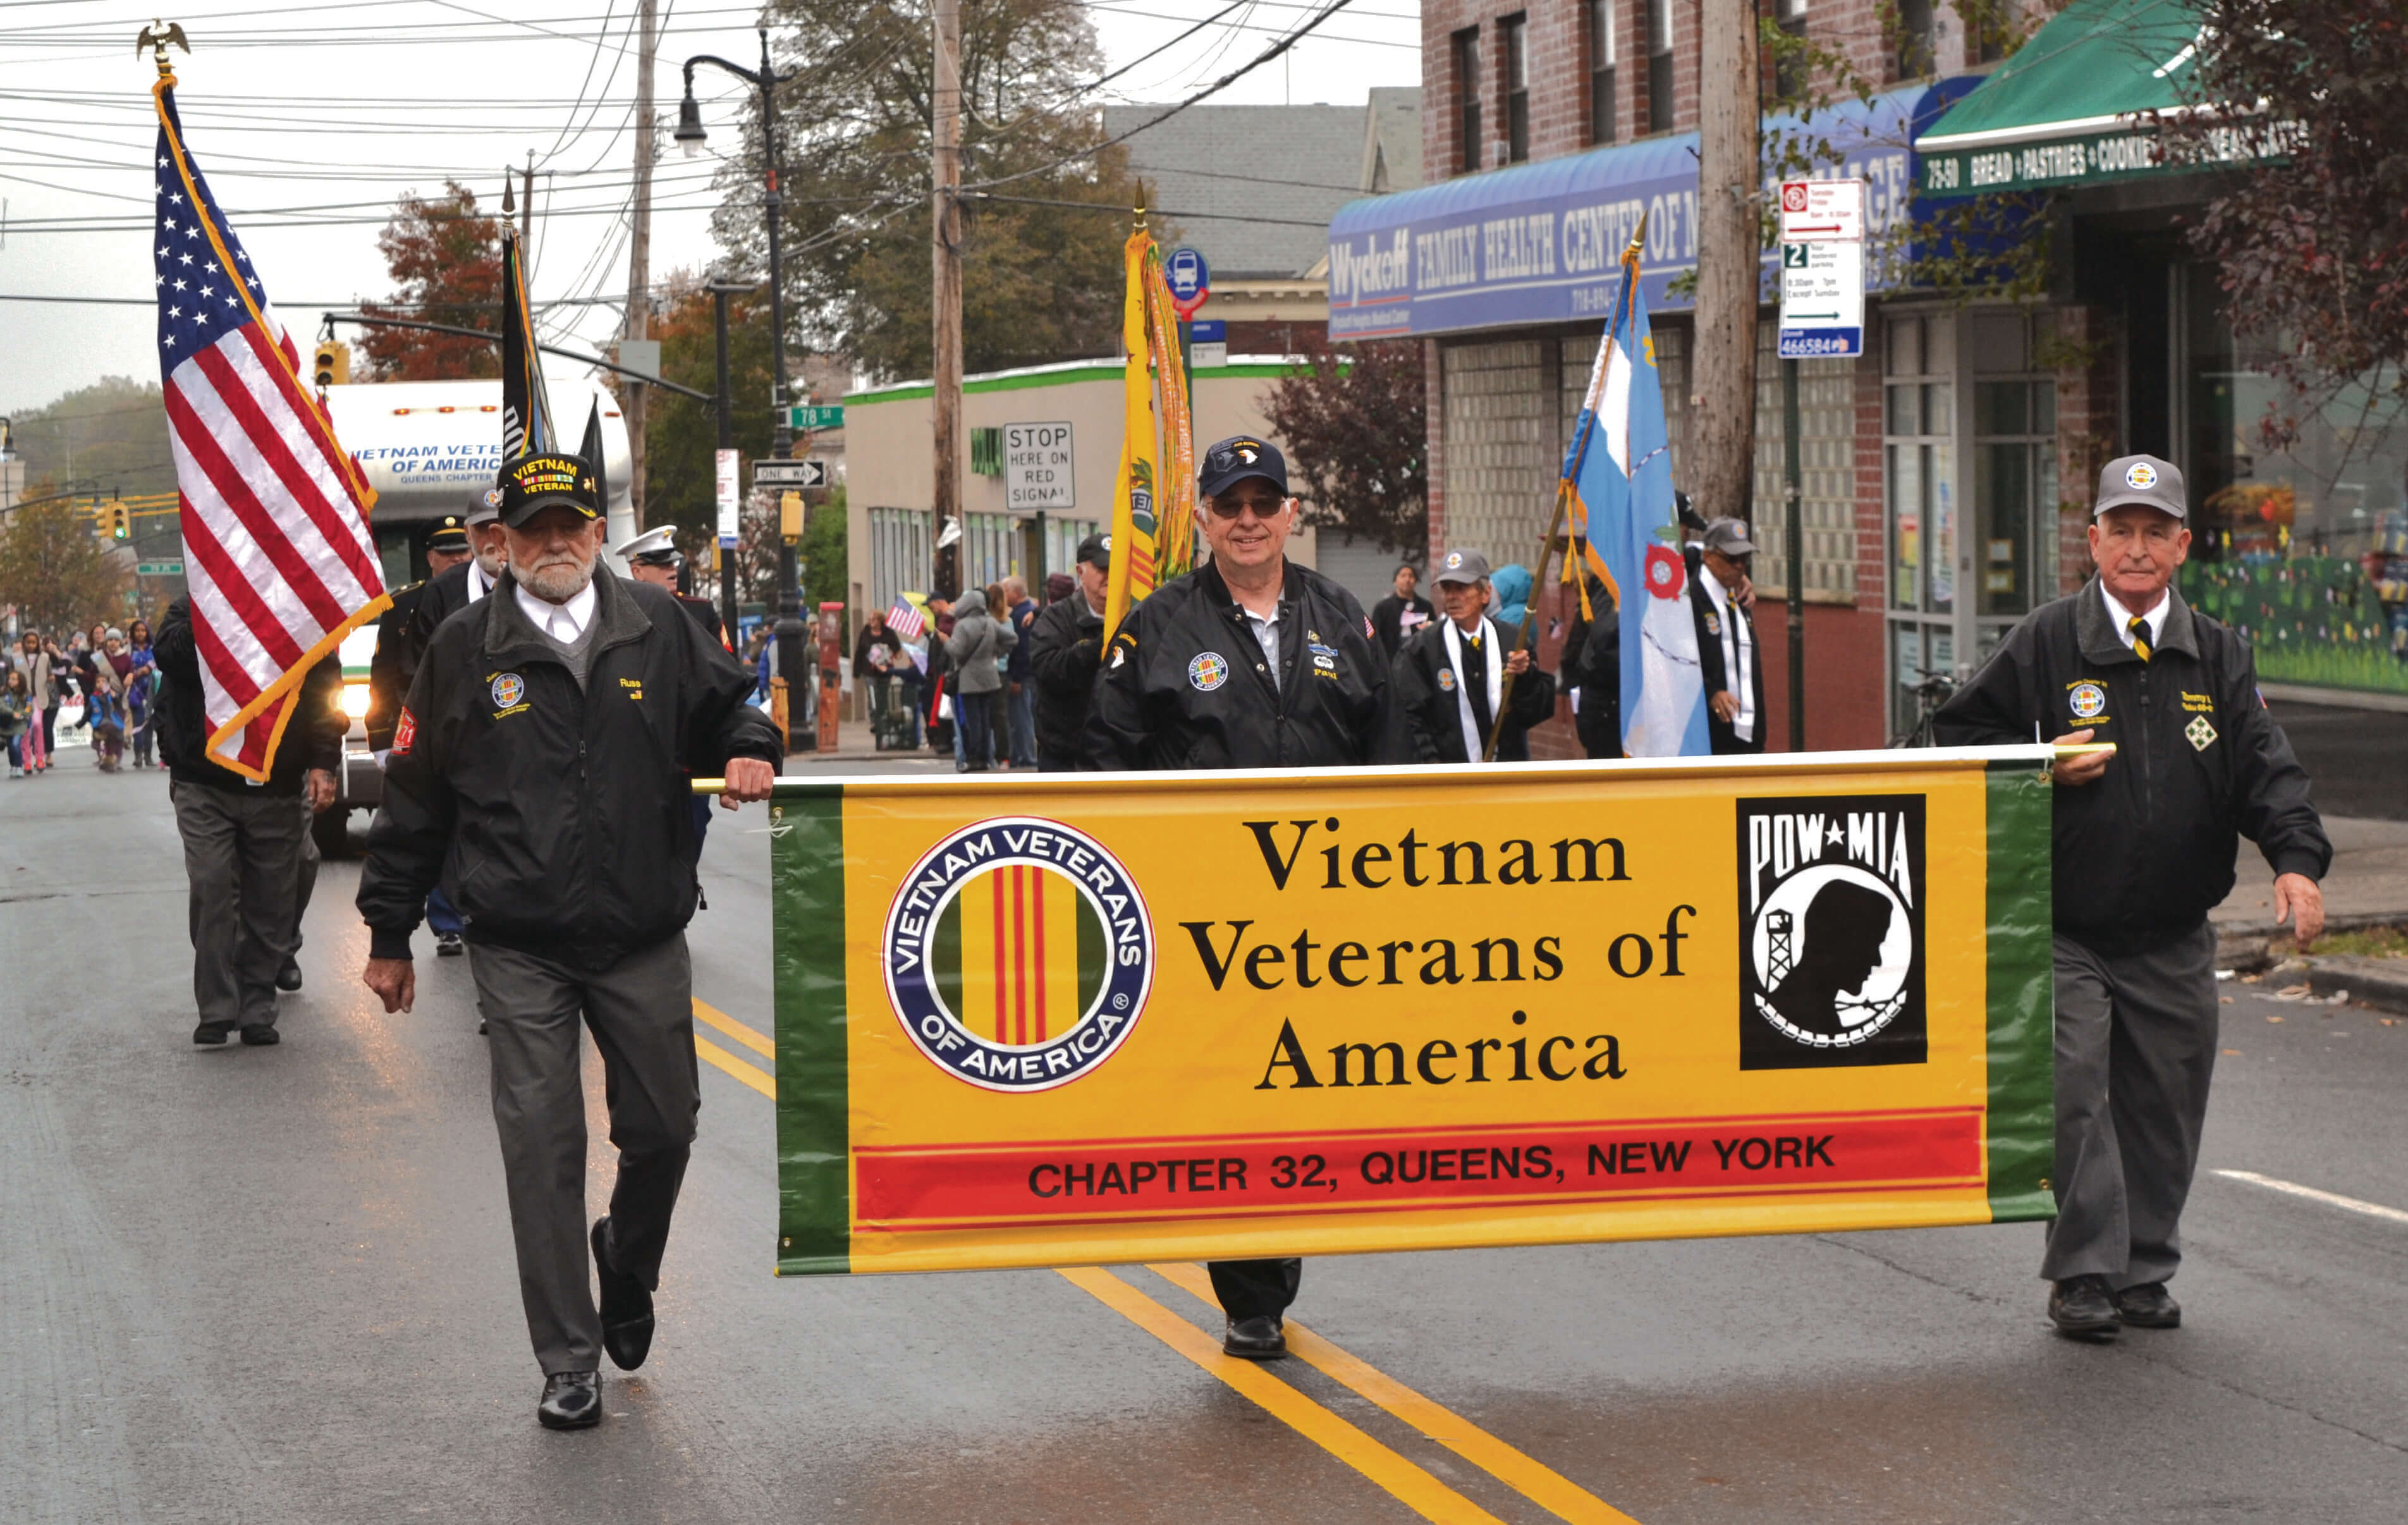 The Vietnam Veterans of America Chapter 32 marching in the 2017 Queens Veterans Day Parade